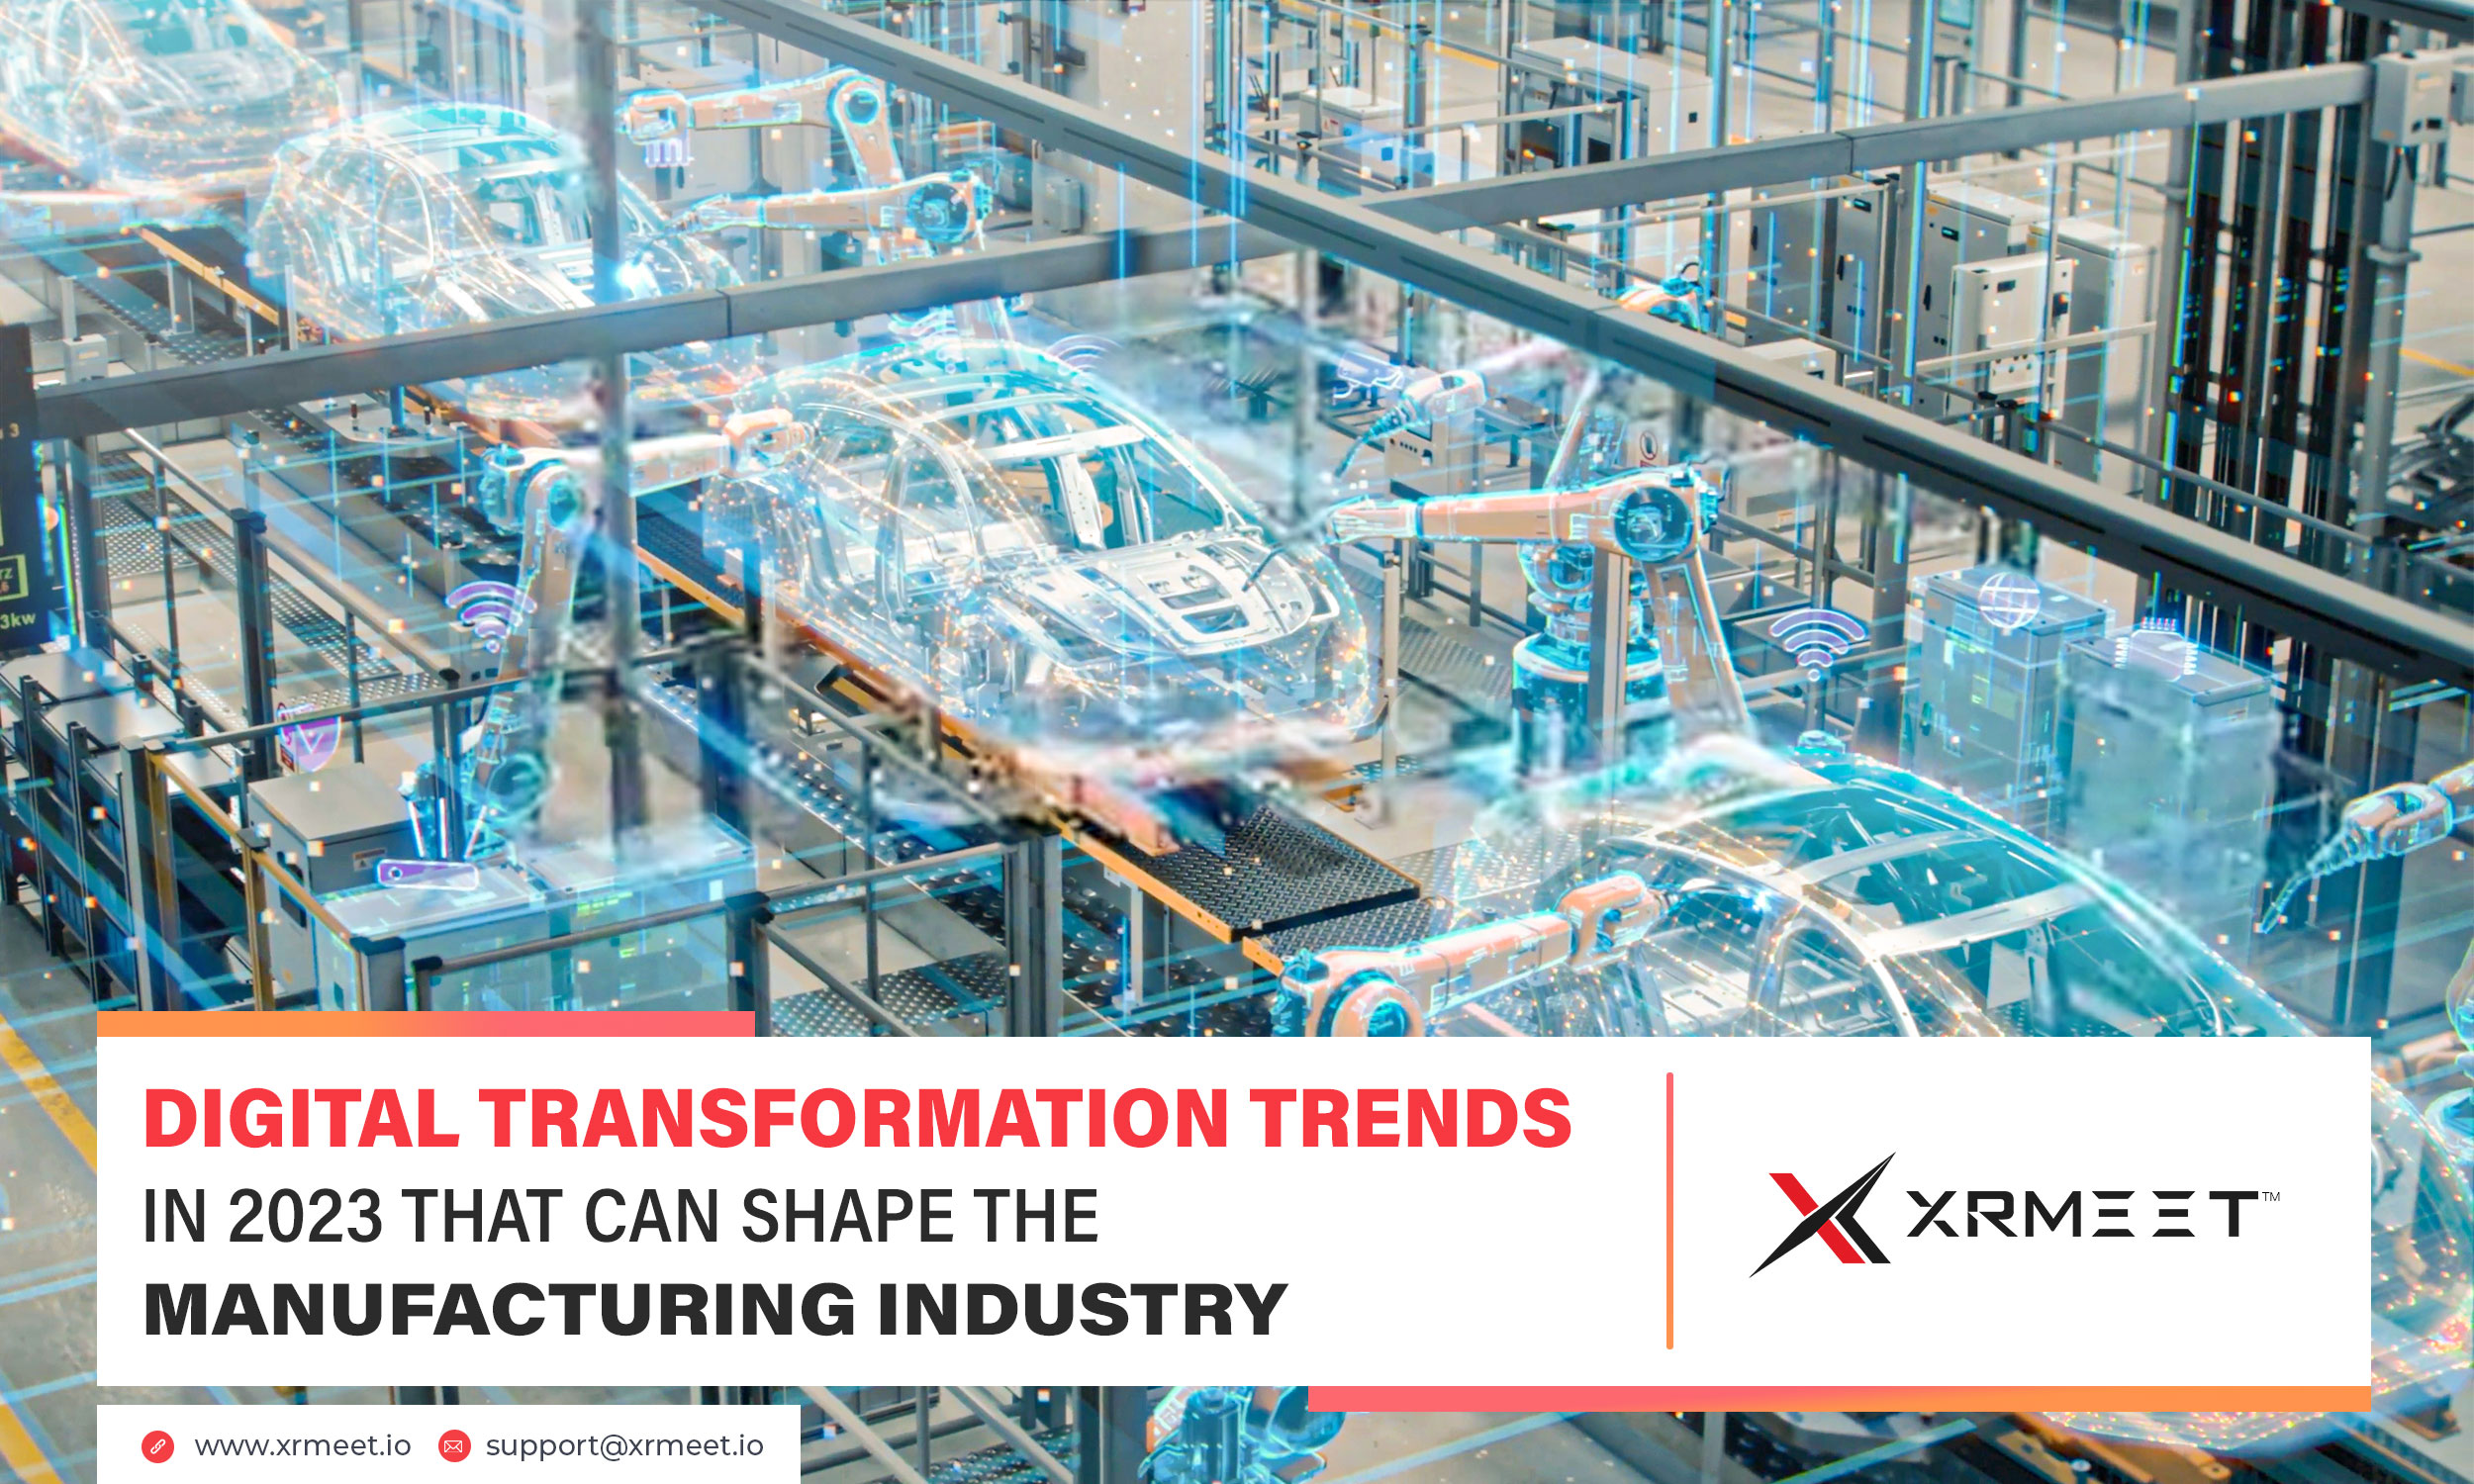 Digital transformation trends in 2023 that shapes the manufacturing industry